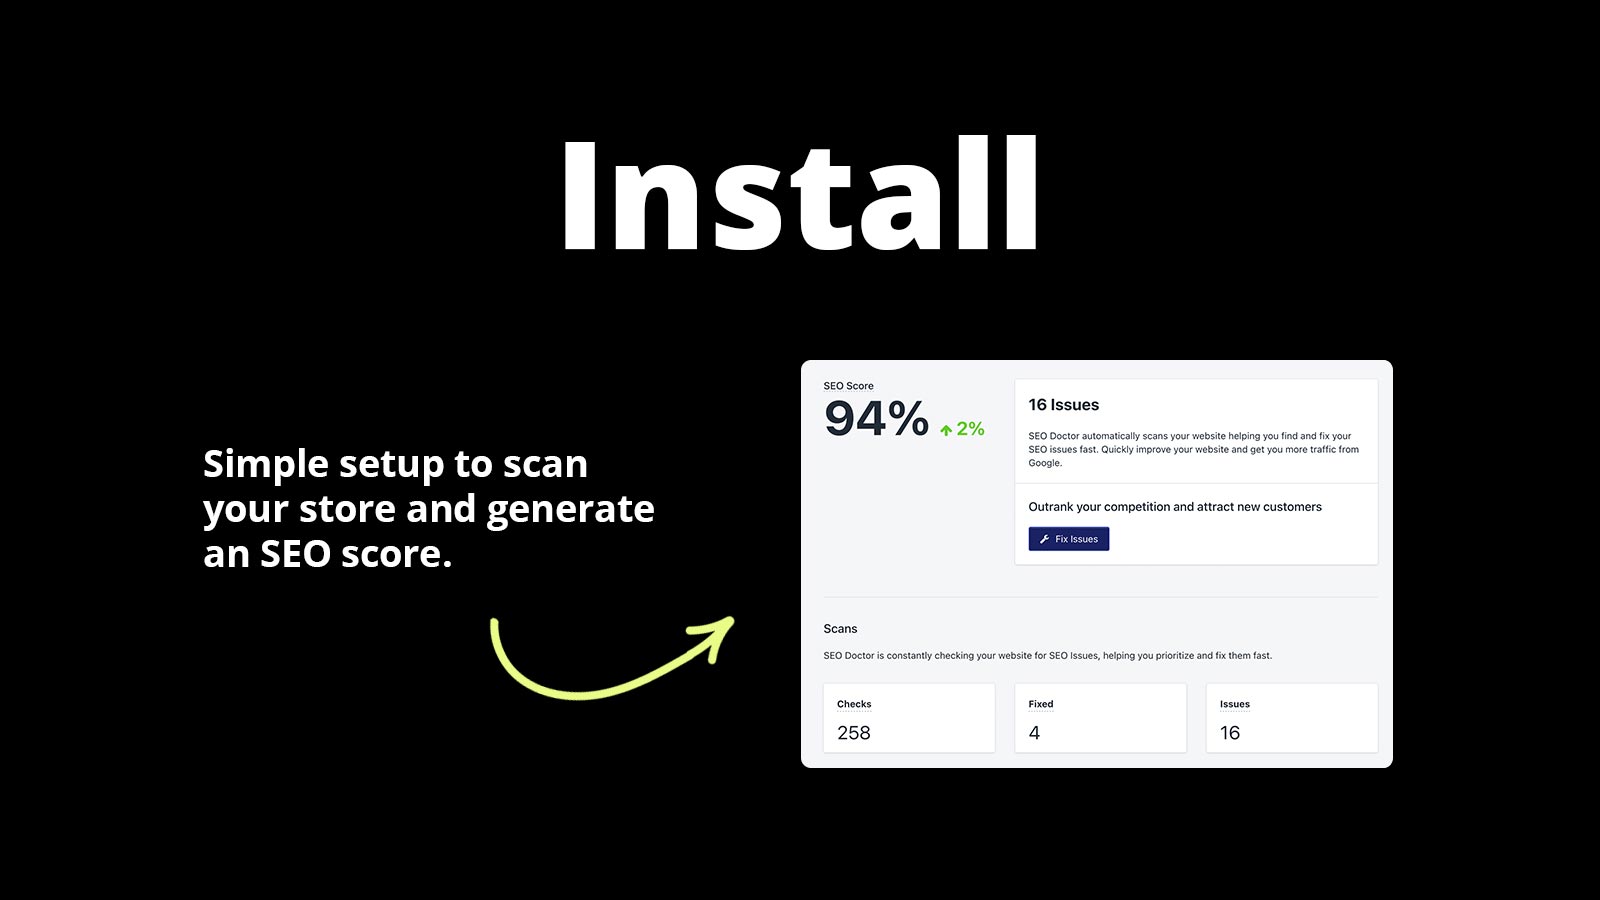 Install. Simple setup to scan your store and generate an SEO score.